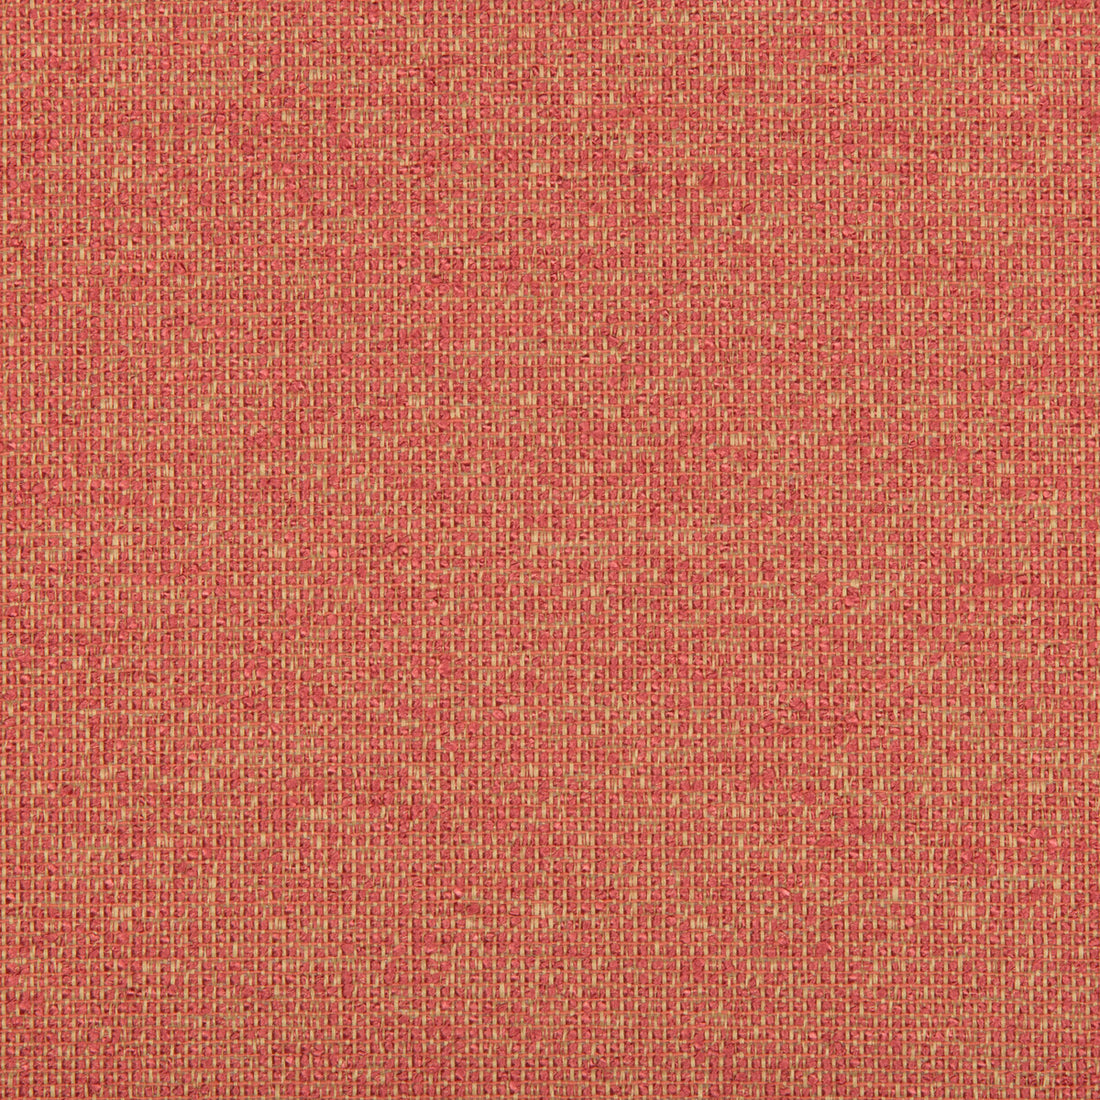 Accolade fabric in watermelon color - pattern 31516.716.0 - by Kravet Contract in the Gis Crypton collection